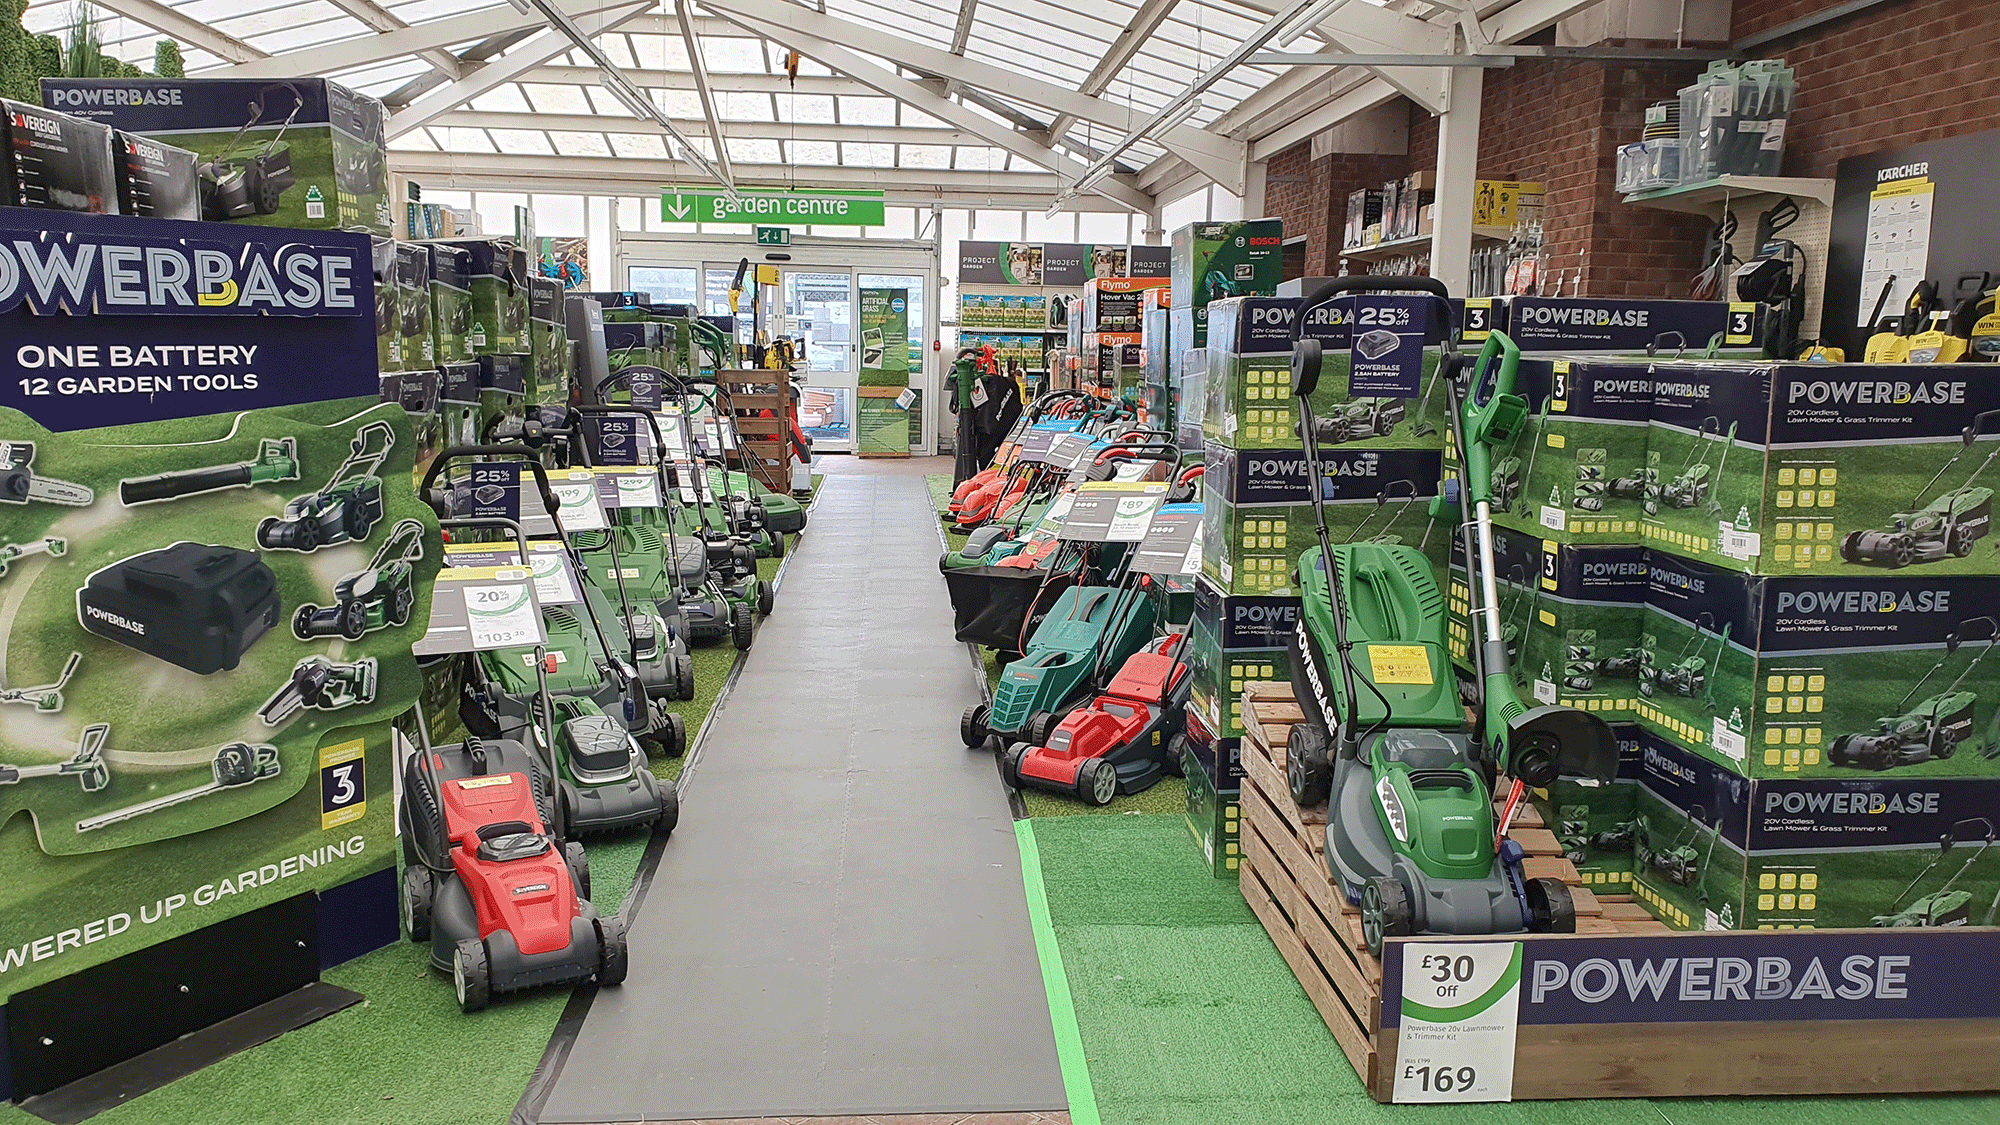 Visit our power tool section for all your garden tidying needs Homebase - Northampton Northampton 03456 407102